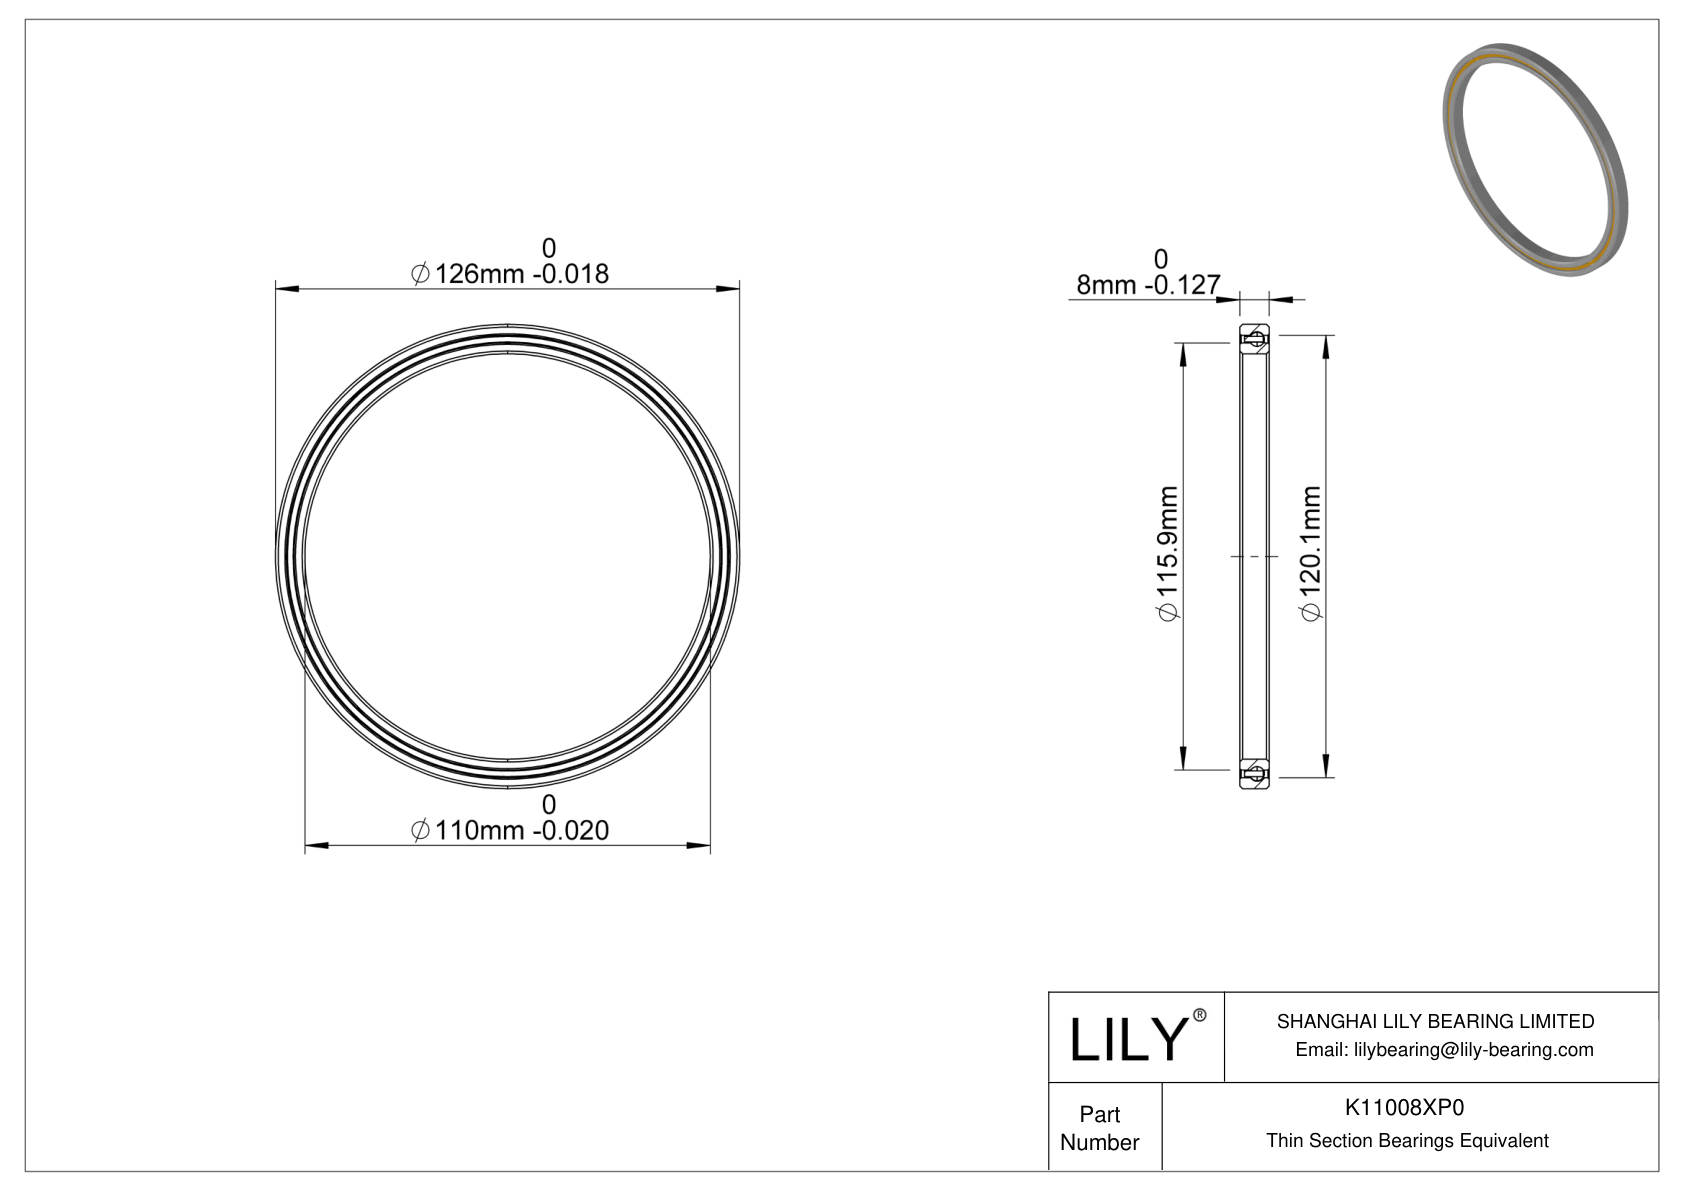 K11008XP0 Constant Section (CS) Bearings cad drawing